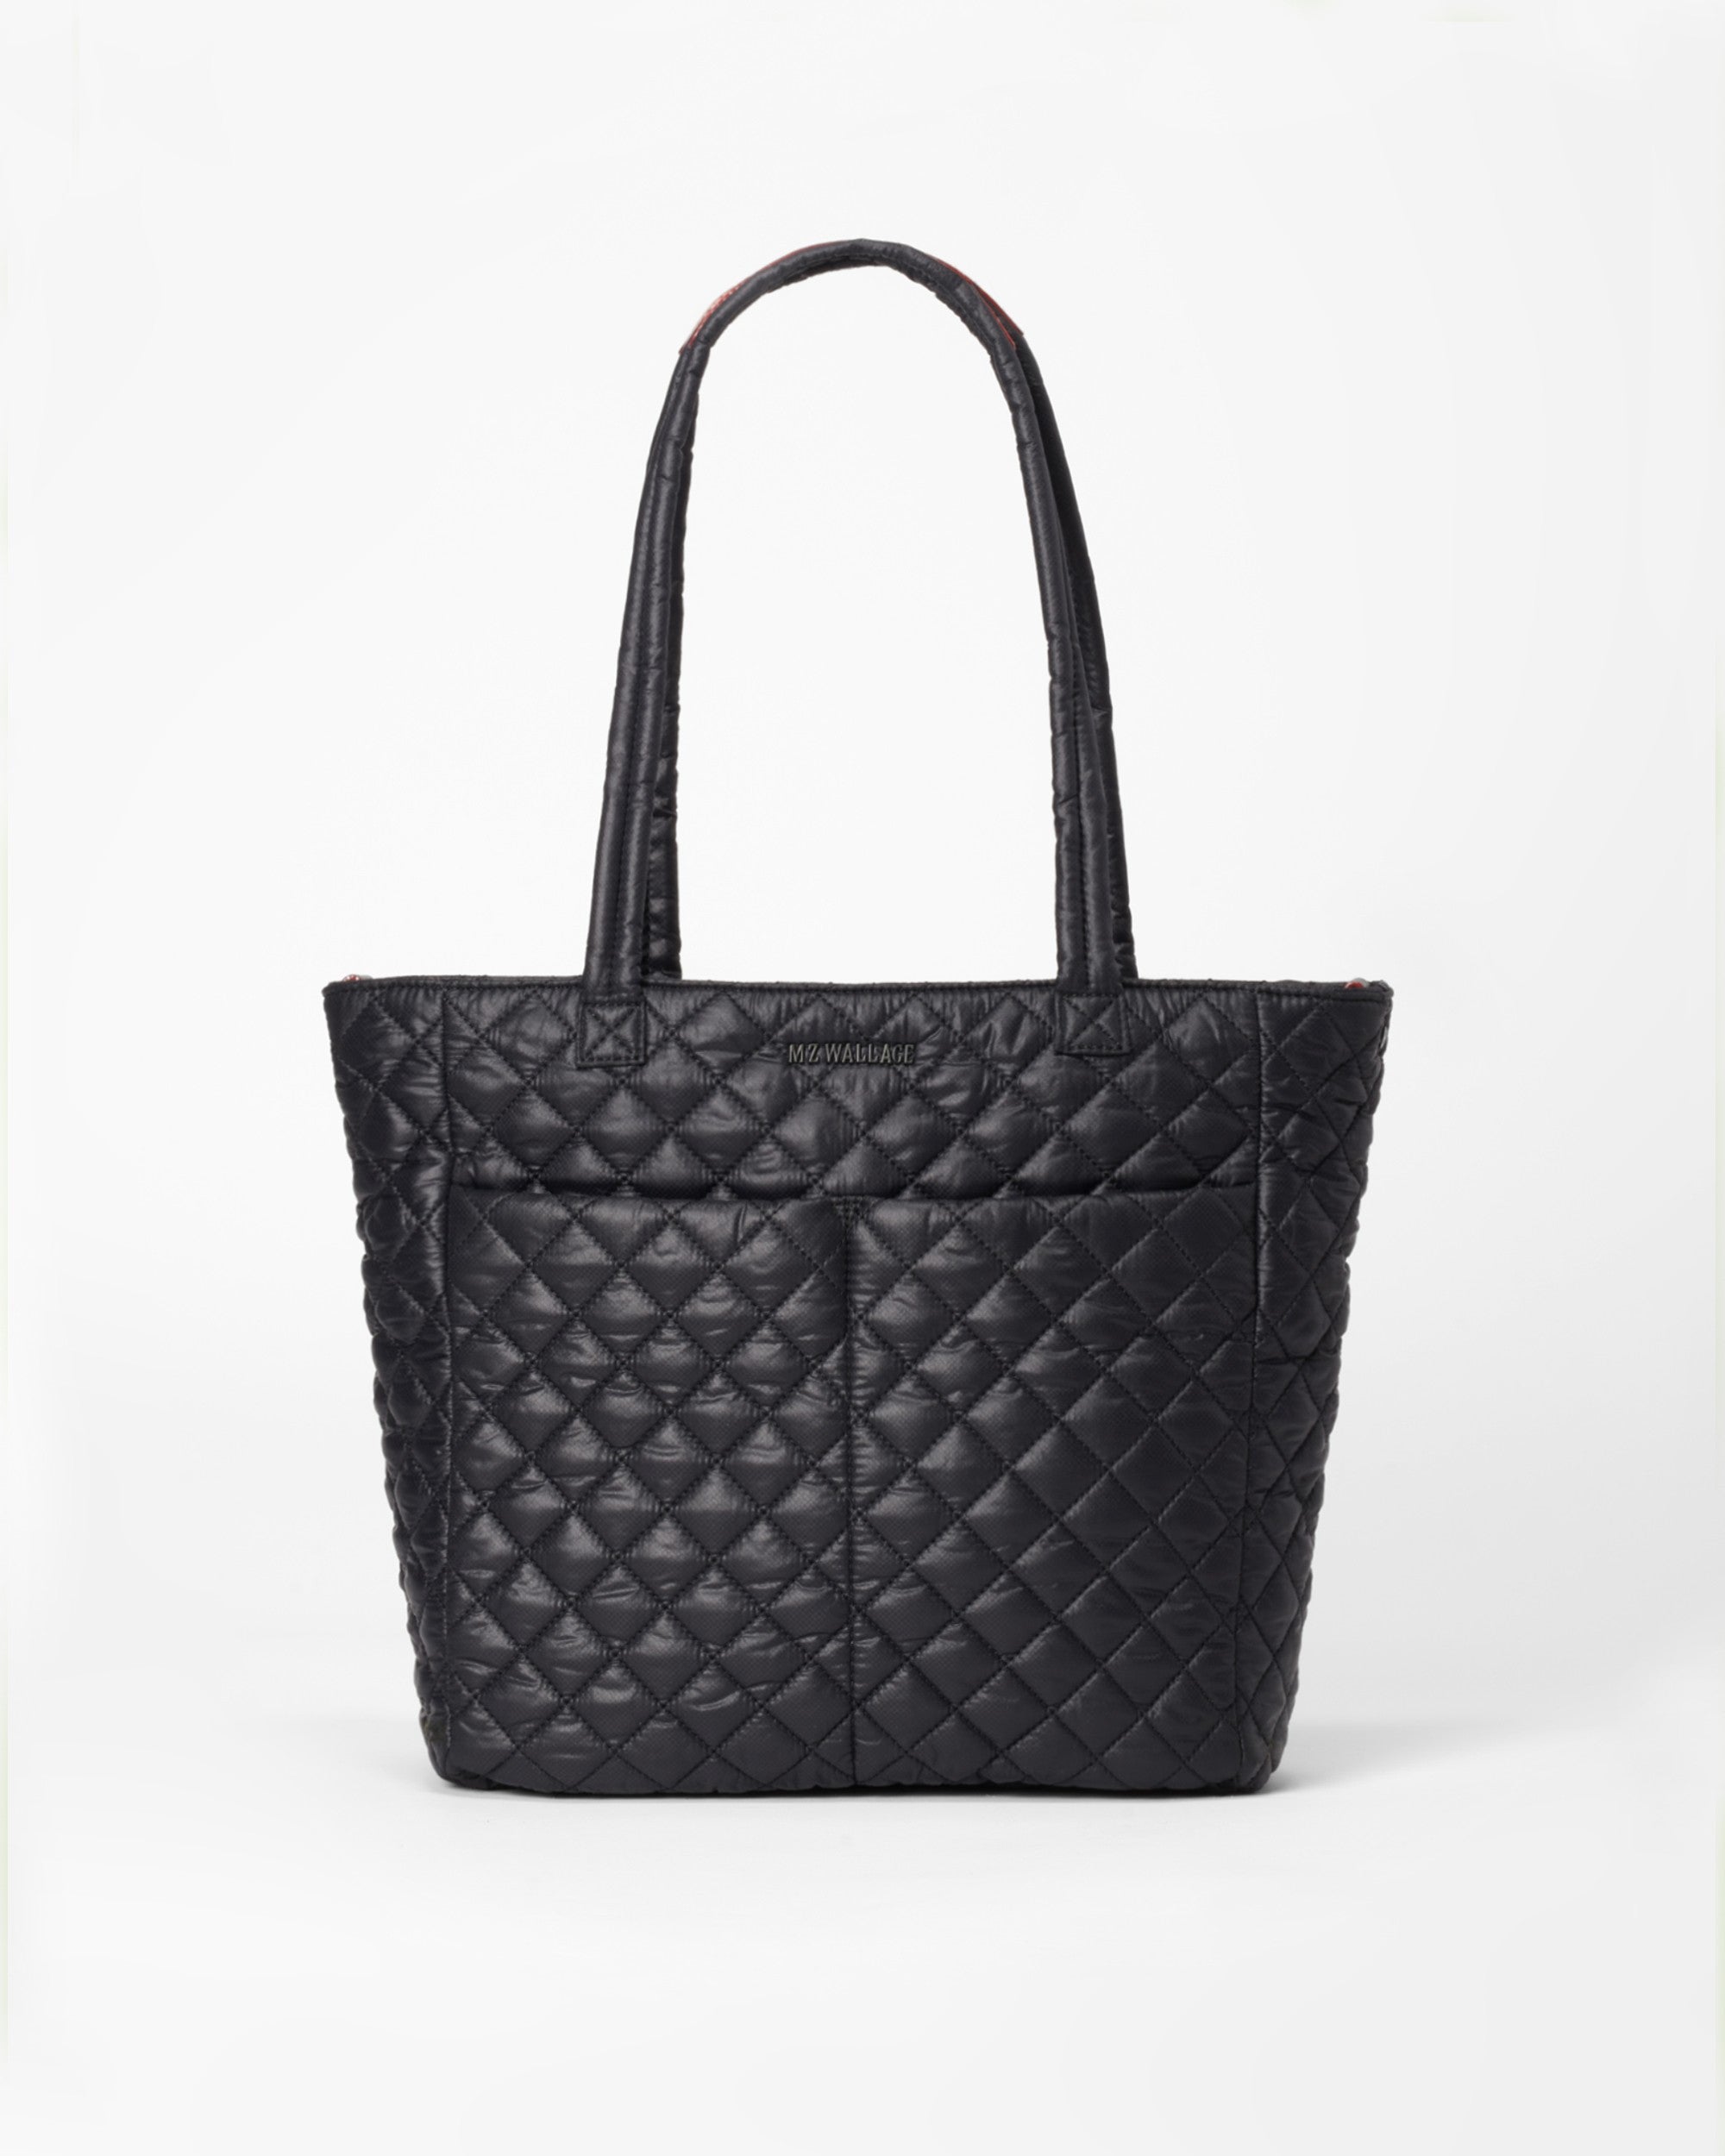 MZ Wallace Quilted Nylon Tote Bag w/Tags - Black Totes, Handbags -  WMZWA38391